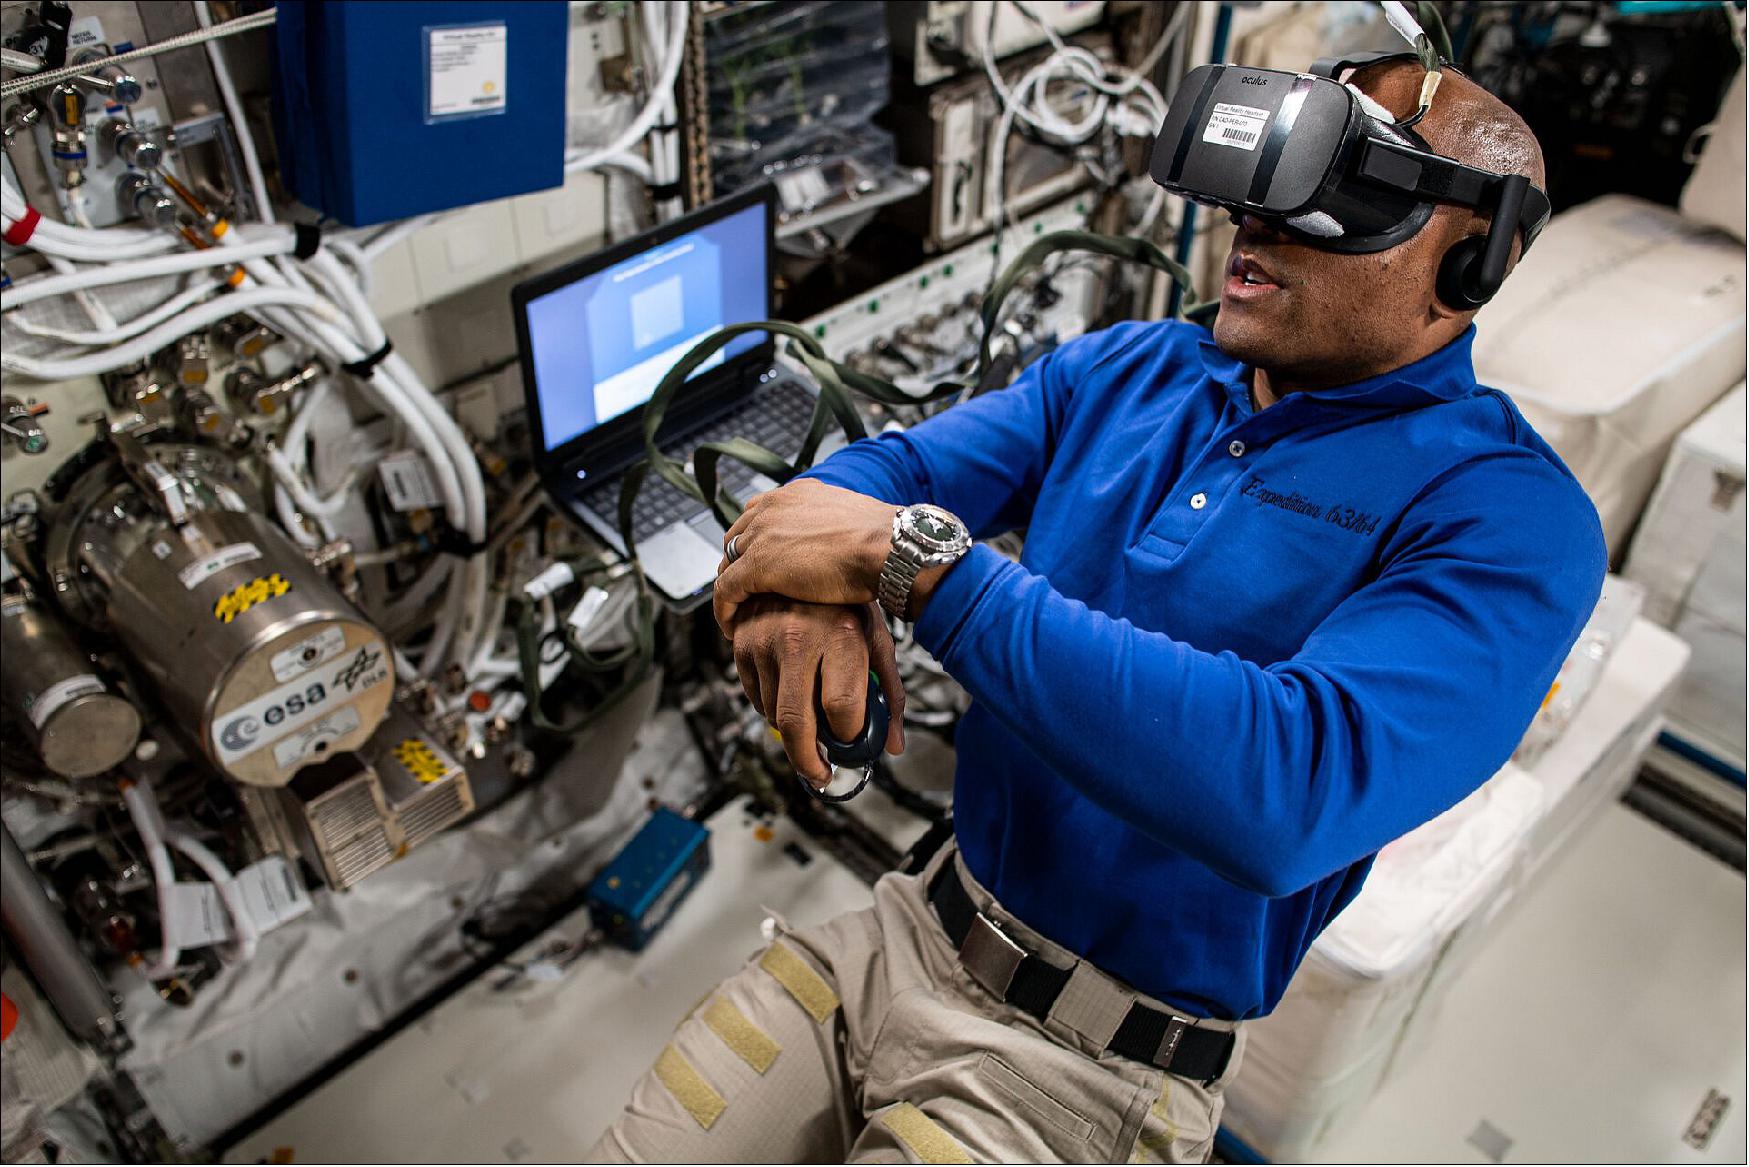 Figure 100: This picture shows NASA astronaut Victor Glover as test subject for ESA's Time experiment on 26 March 2021. This experiment uses virtual reality to chart whether our perception of time changes when living on the International Space Station (image credit: NASA)